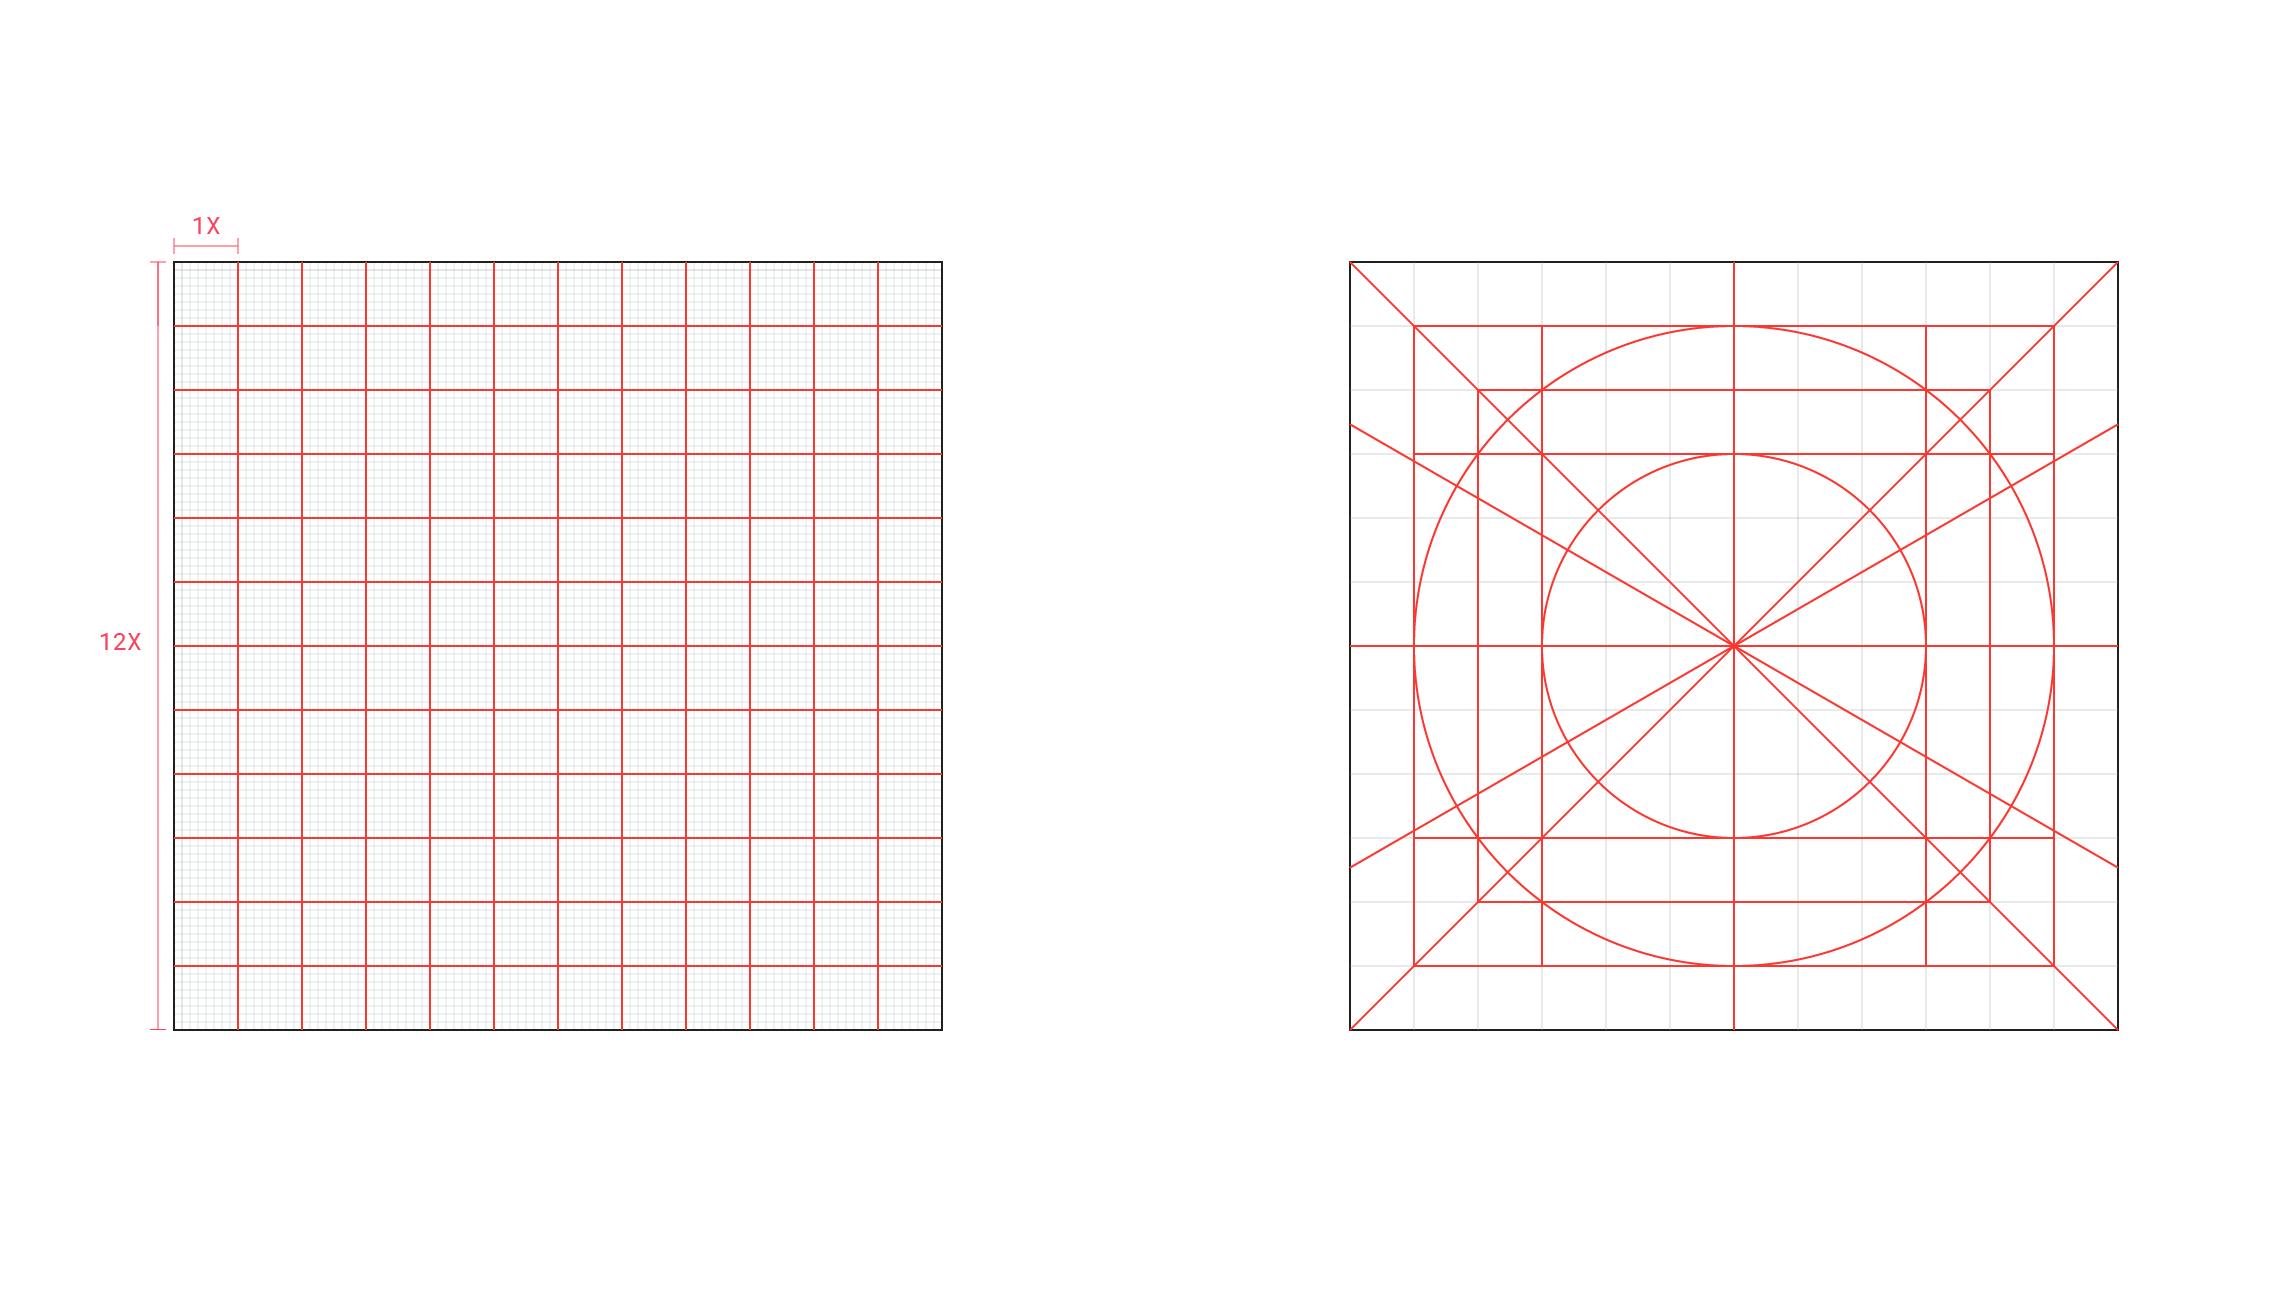 A grid that consists of twelve rows and twelve columns is displayed on the left hand side. On the right hand side, concentric circles, squares, and diagonal lines are strategically placed within a grid with the same dimensions to provide guidelines for icon creation.